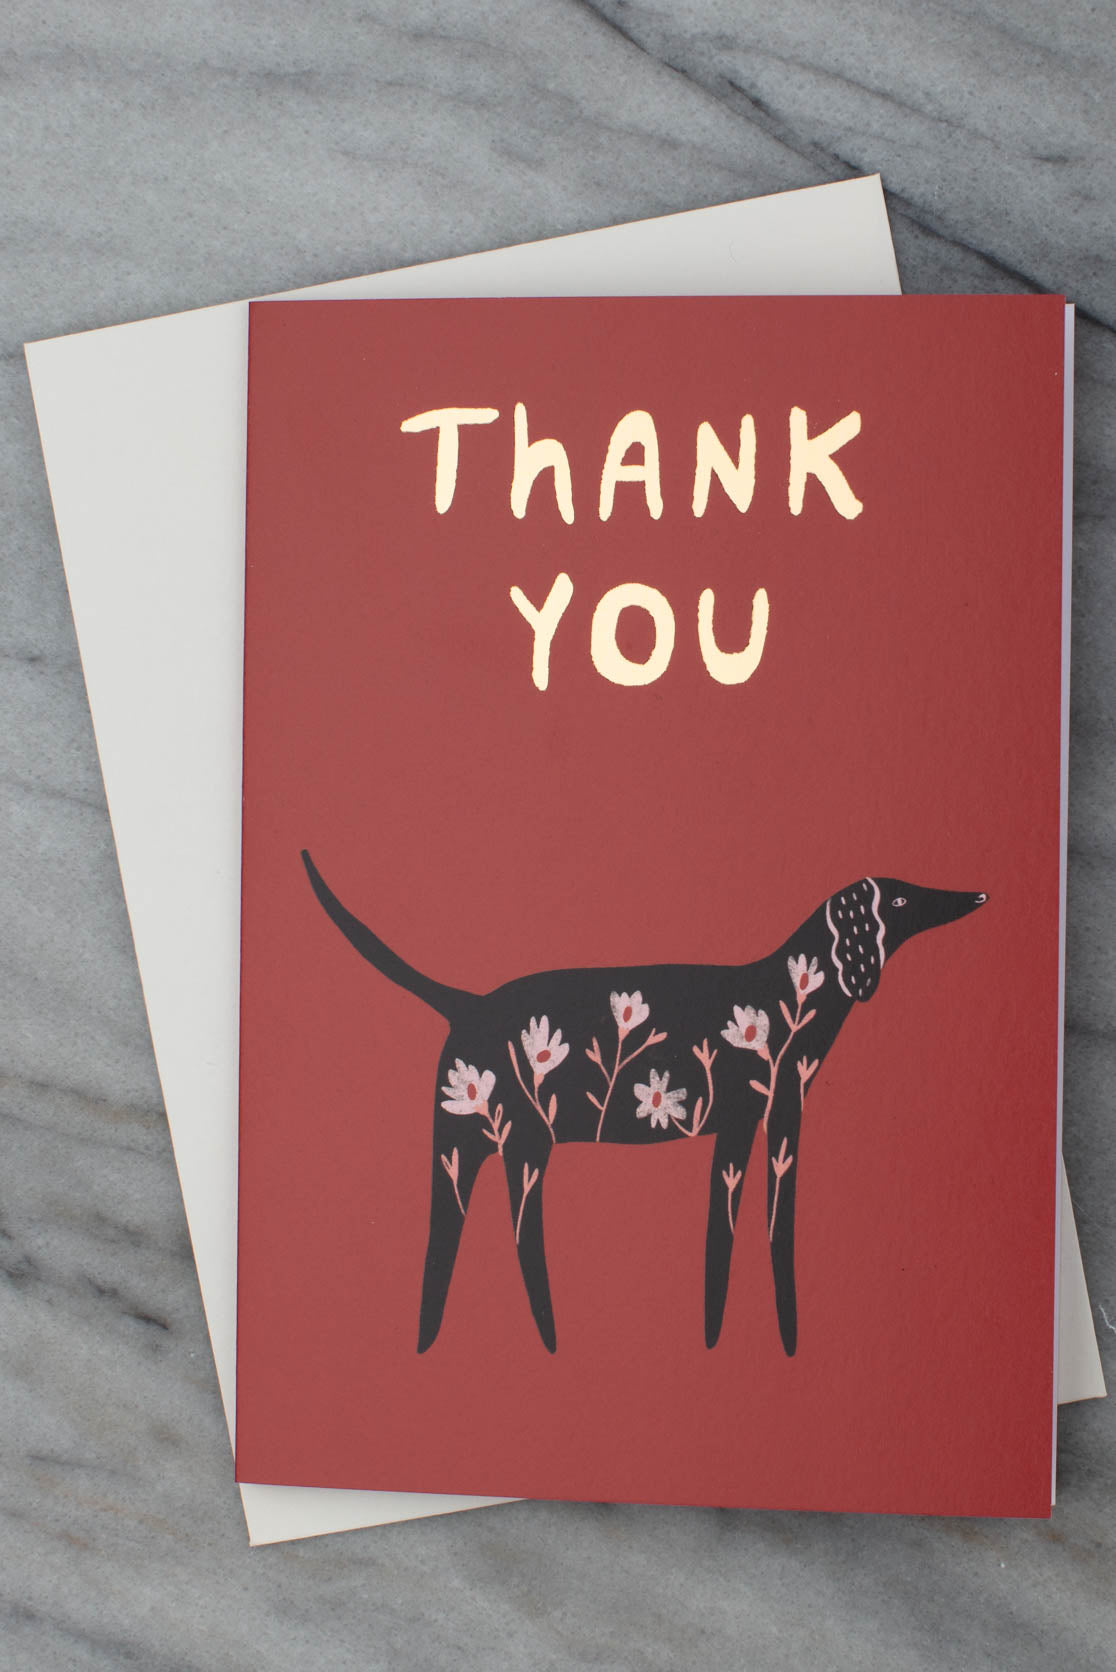 Thank you card in red with a white envelope